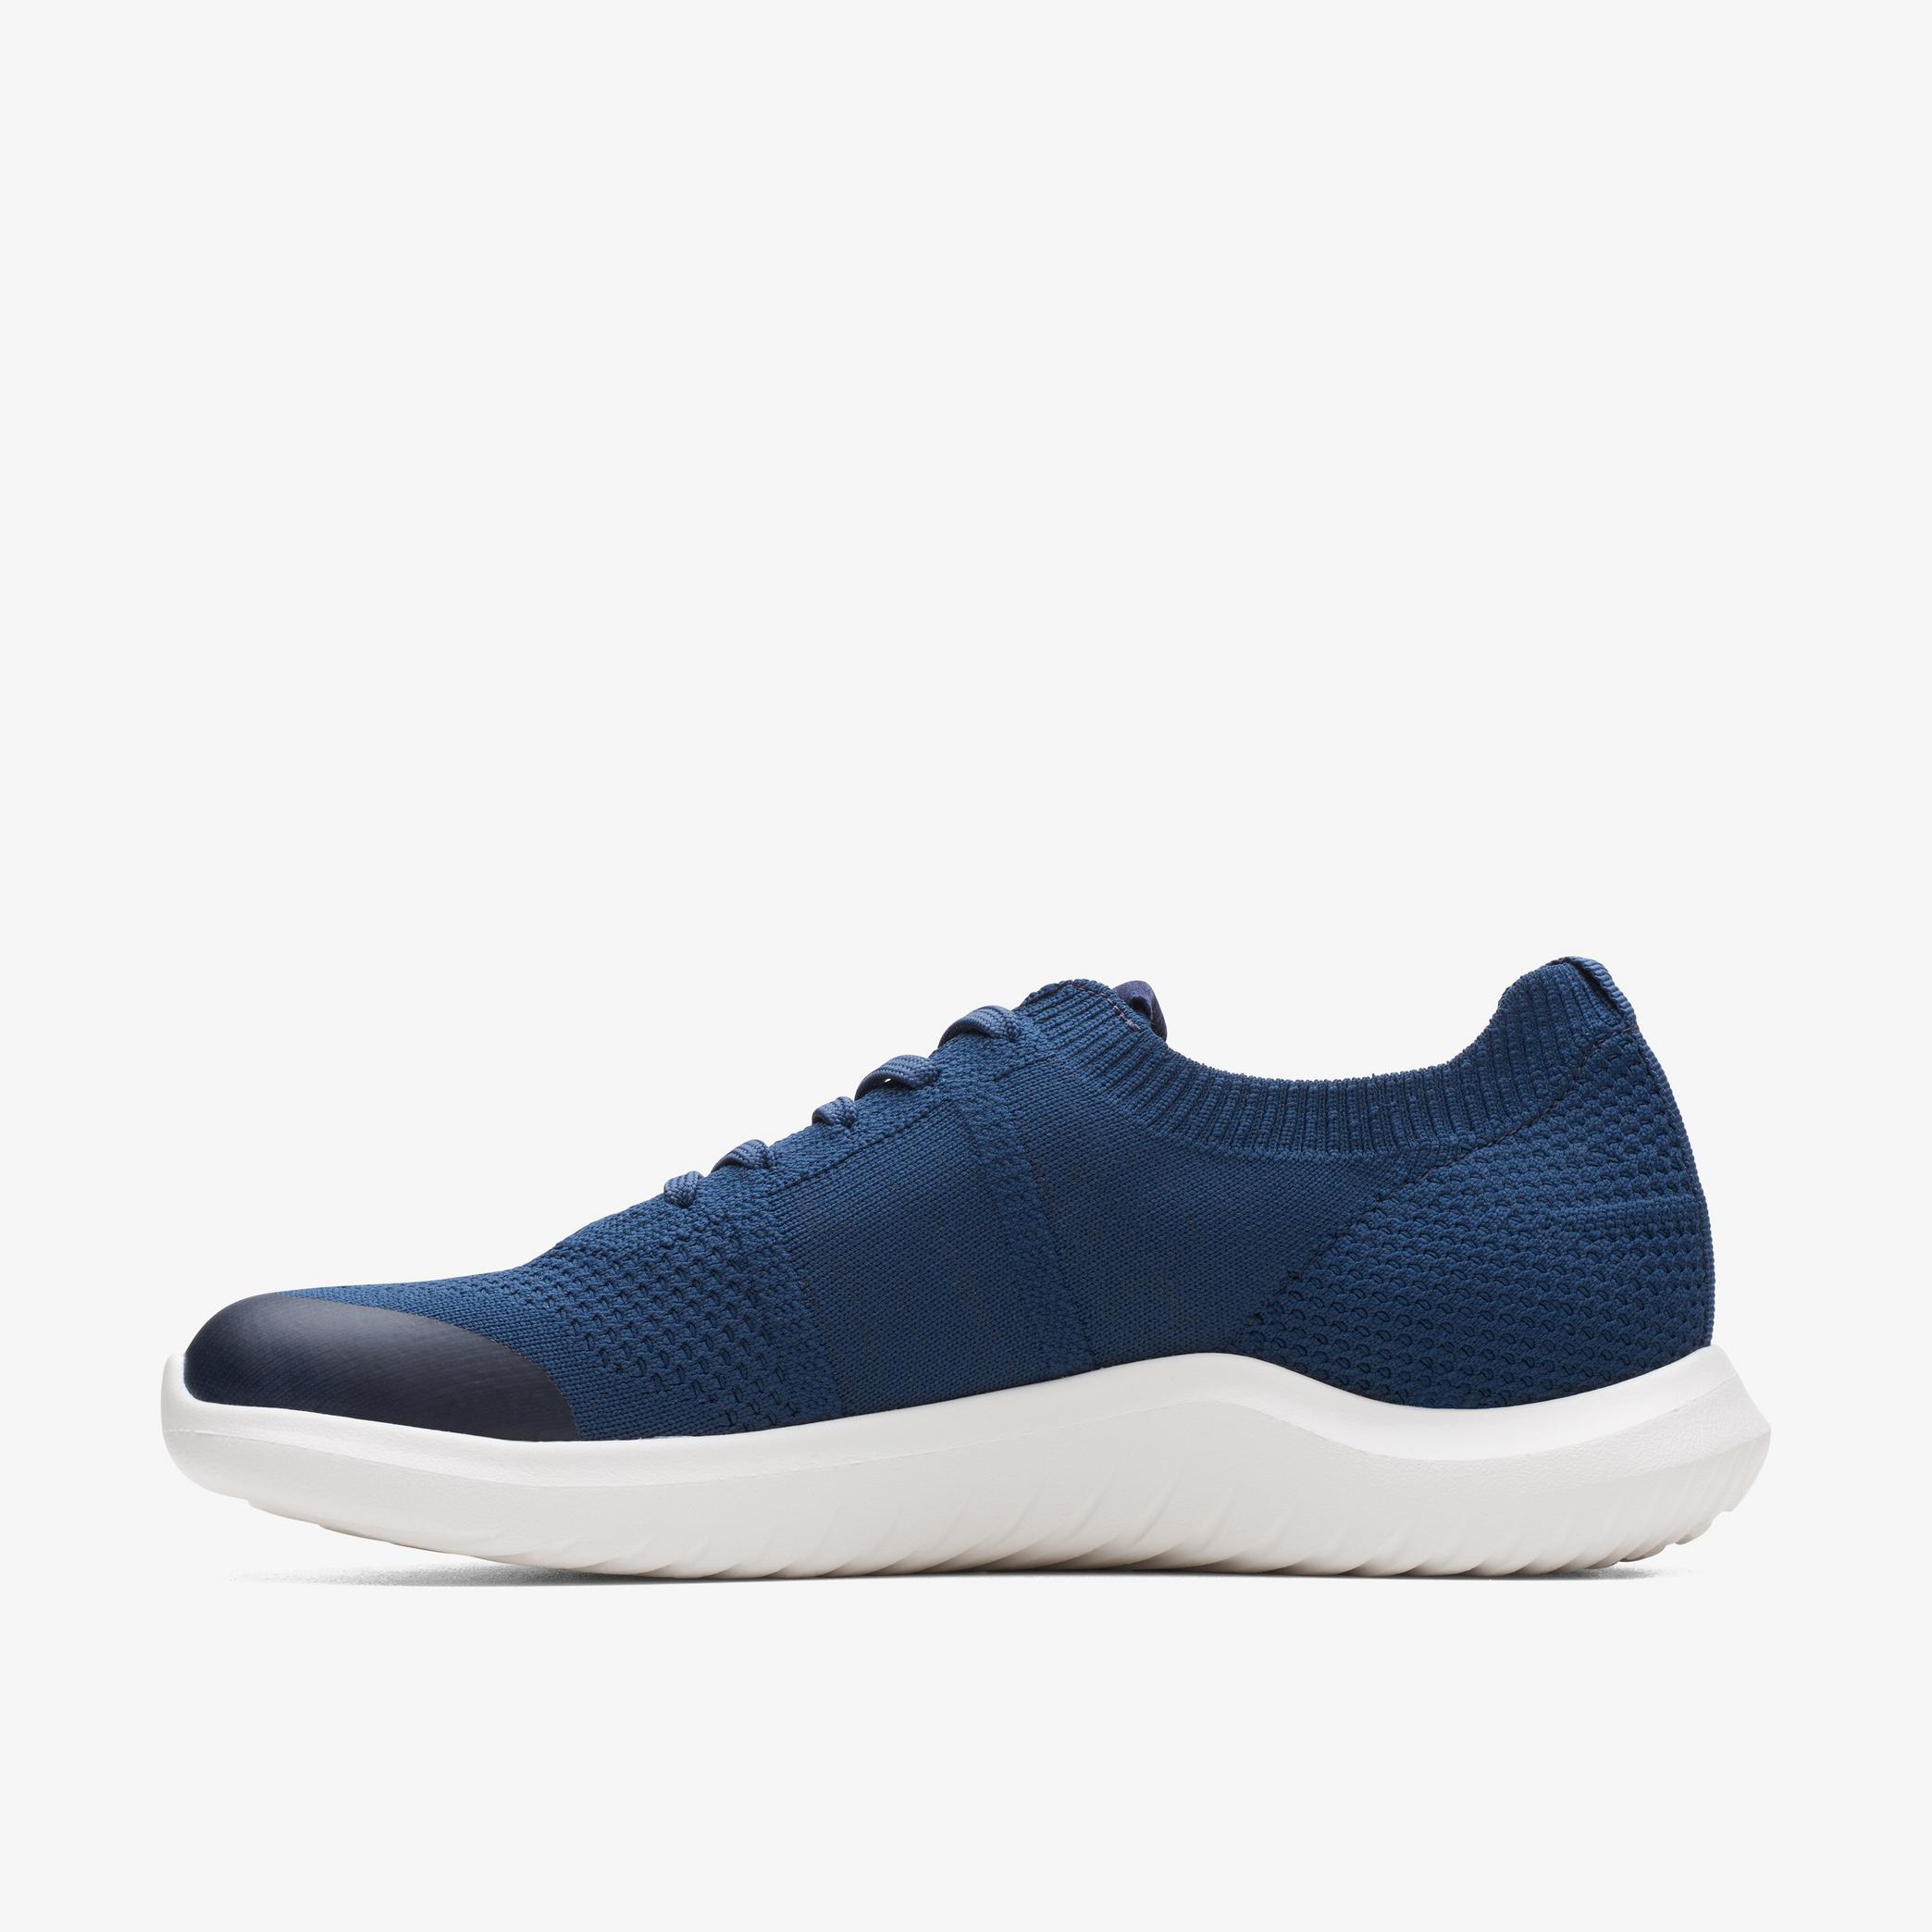 WOMENS NovaLite Lace Navy Knit Trainers | Clarks Outlet